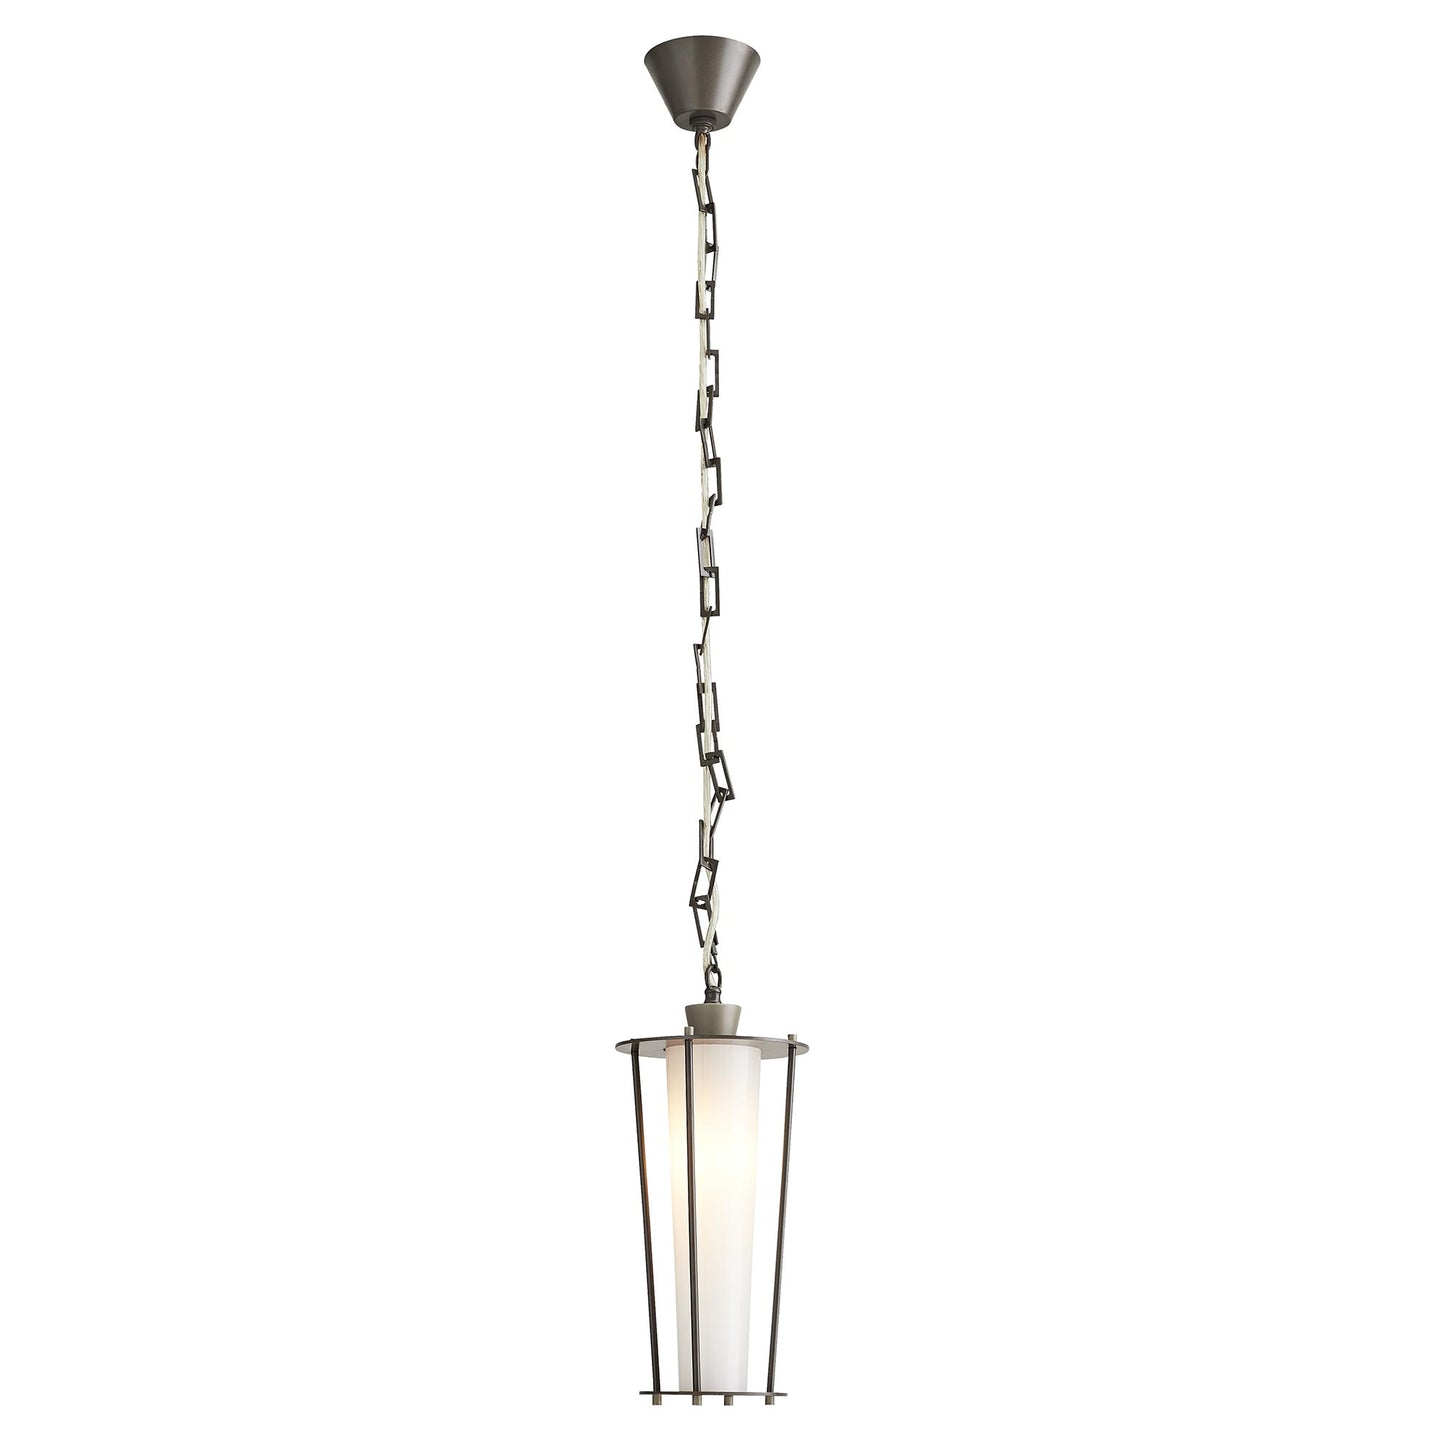 Sorel Outdoor Pendant Light - Rustic Charm for Outdoor Spaces